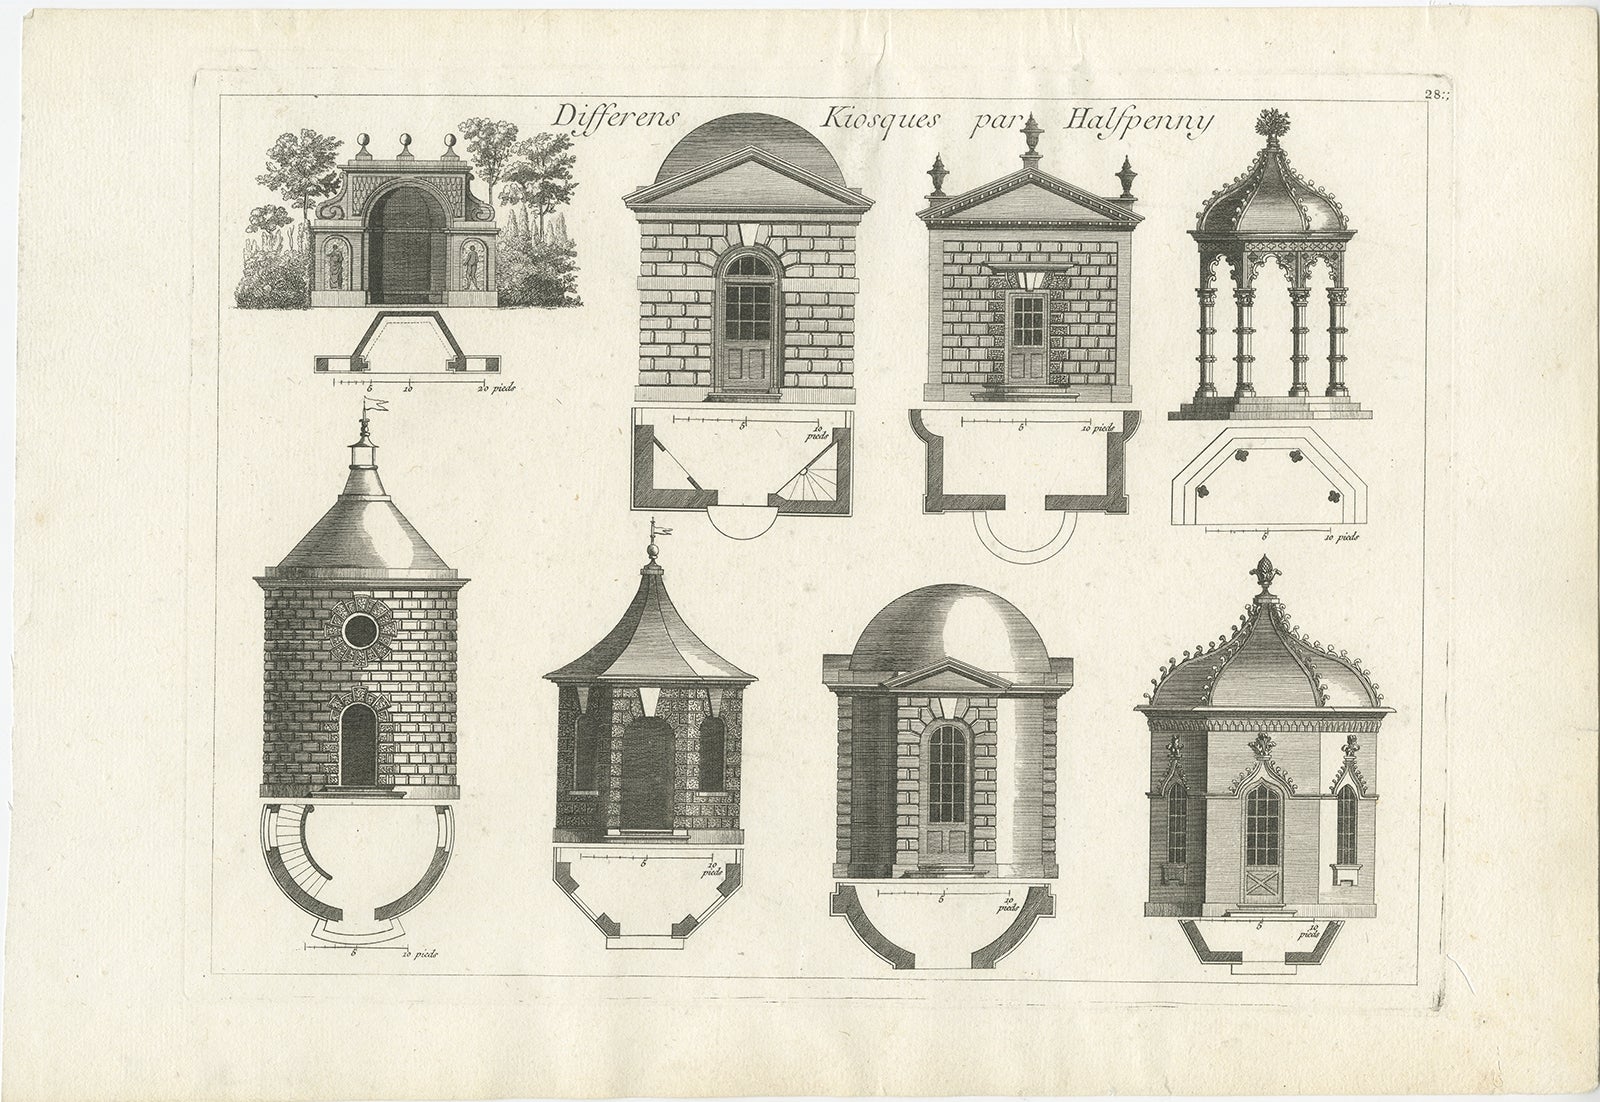 Antique print titled 'Differens Kiosques par Halfpenny'. Copper engraving showing various garden kiosks. This print originates from 'Jardins Anglo-Chinois à la Mode' by Georg Louis le Rouge. Artists and Engravers: The work of Le Rouge is considered